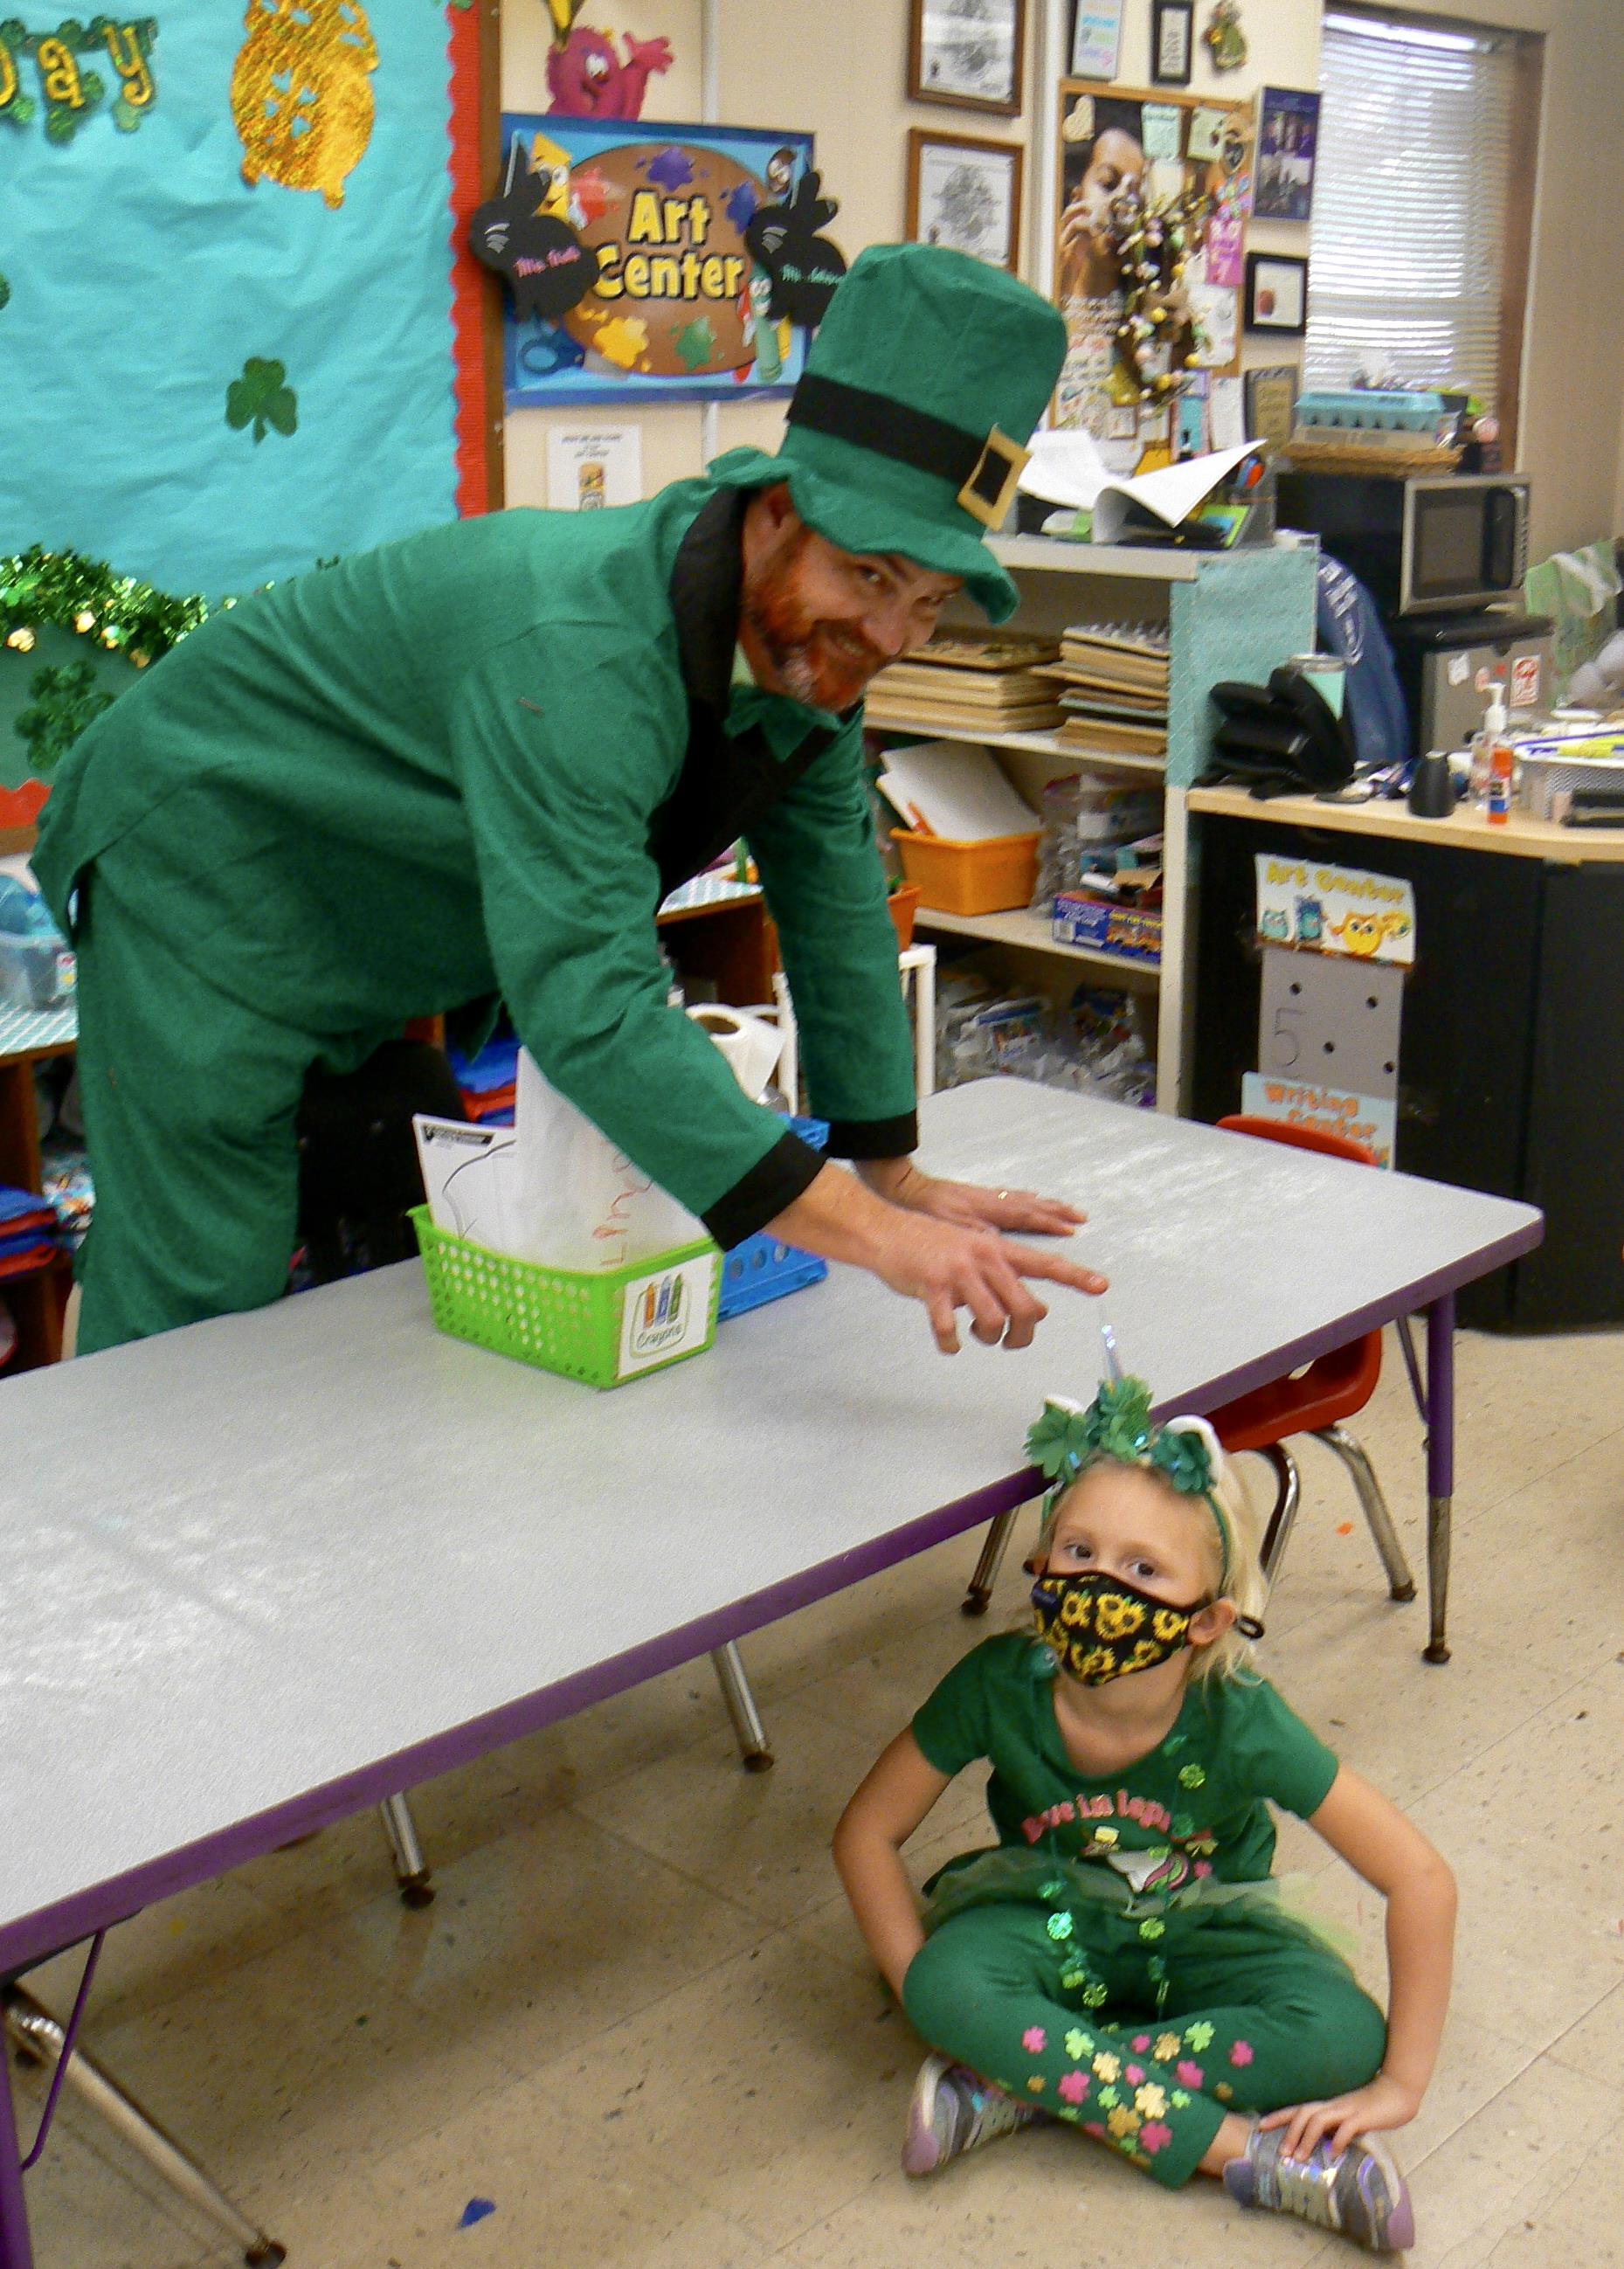 Students were visited by the leprechaun during lunch.